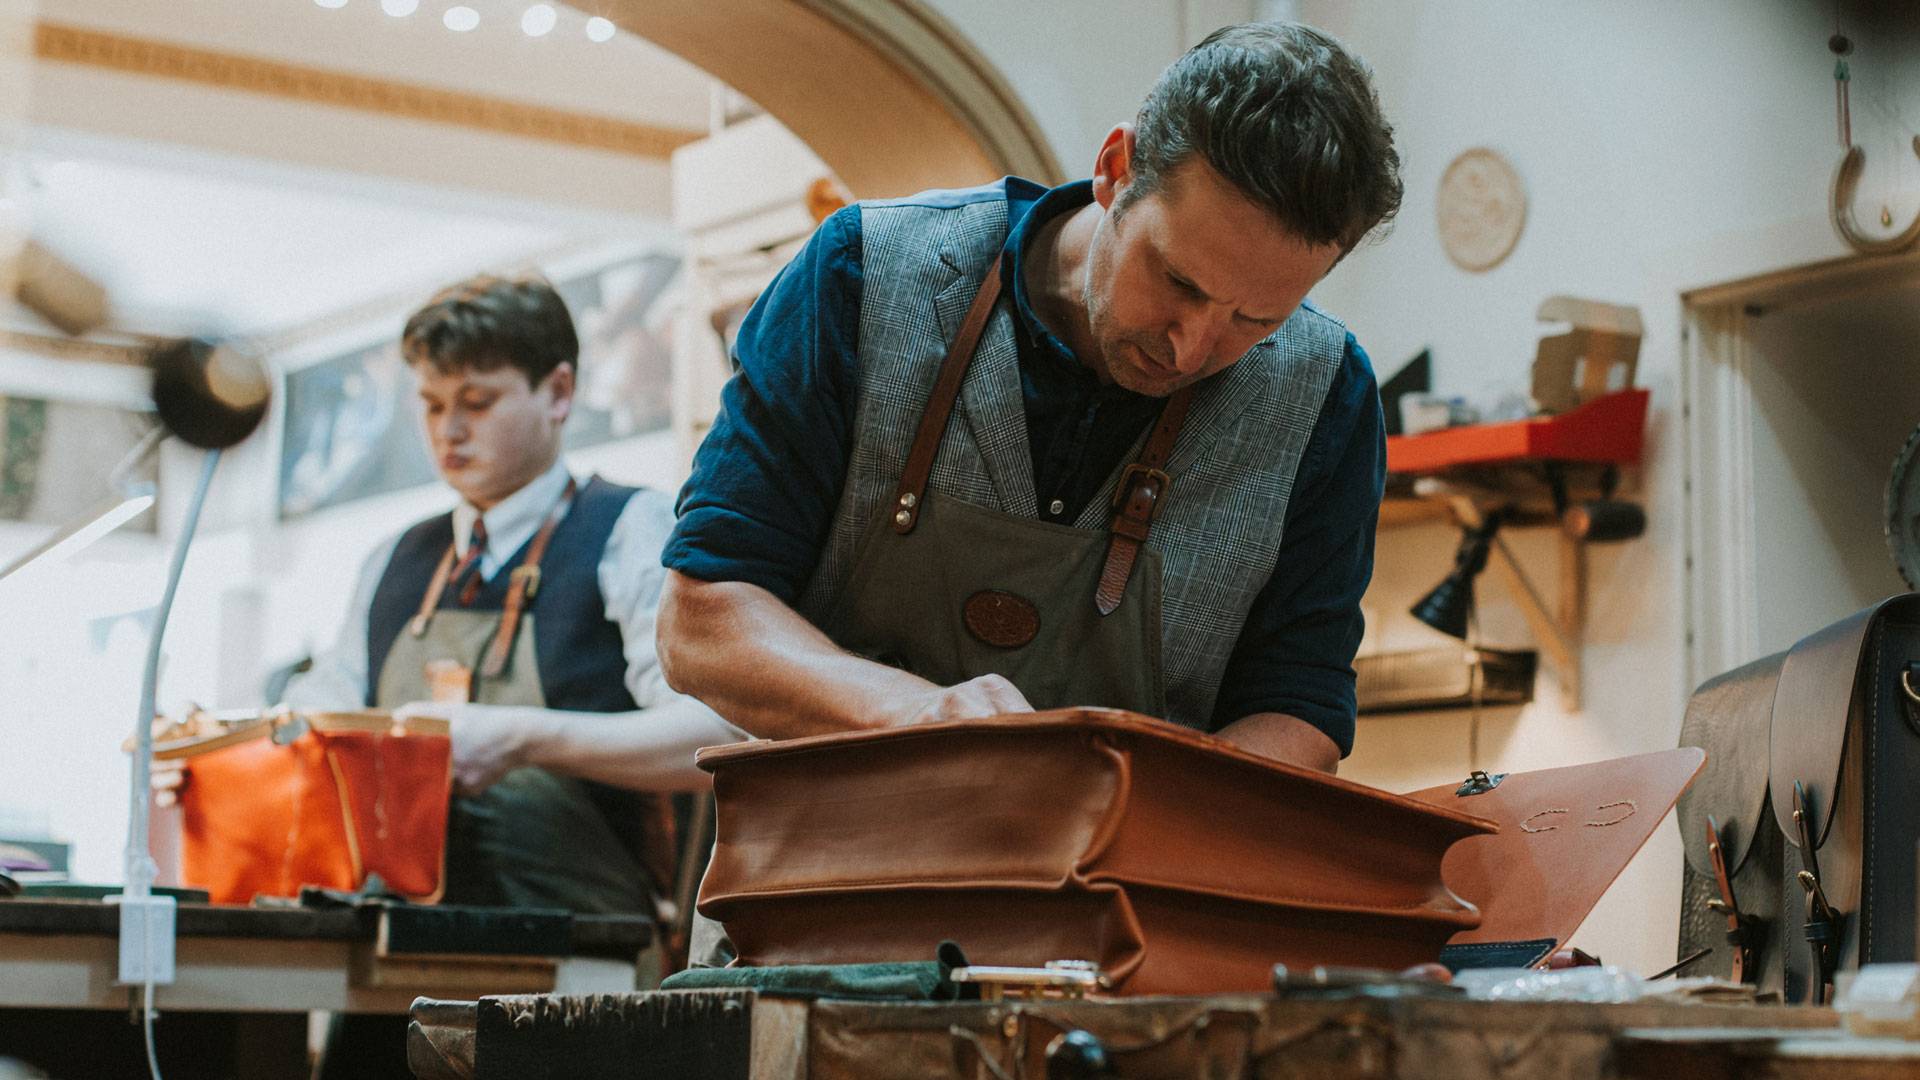 Simon Harvey Potts, owner and Master craftsman making an Officers Briefcase in London tan colour.